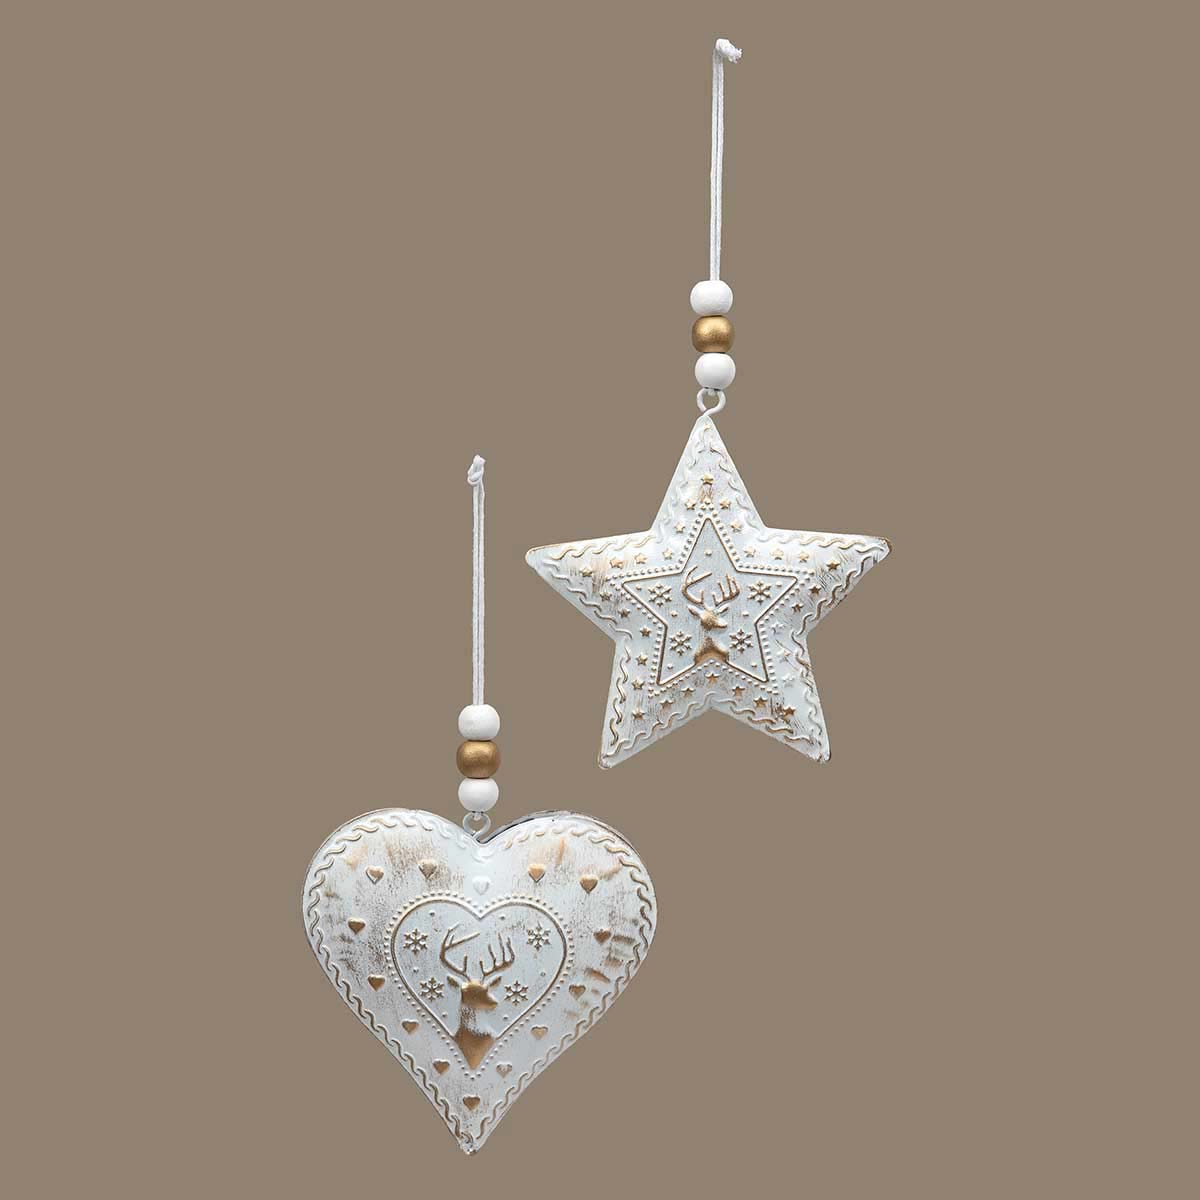 ORNAMENT STAR/HEART 2 ASSORTED 3.5IN X .5IN X 3.5IN/3.75IN WHITE